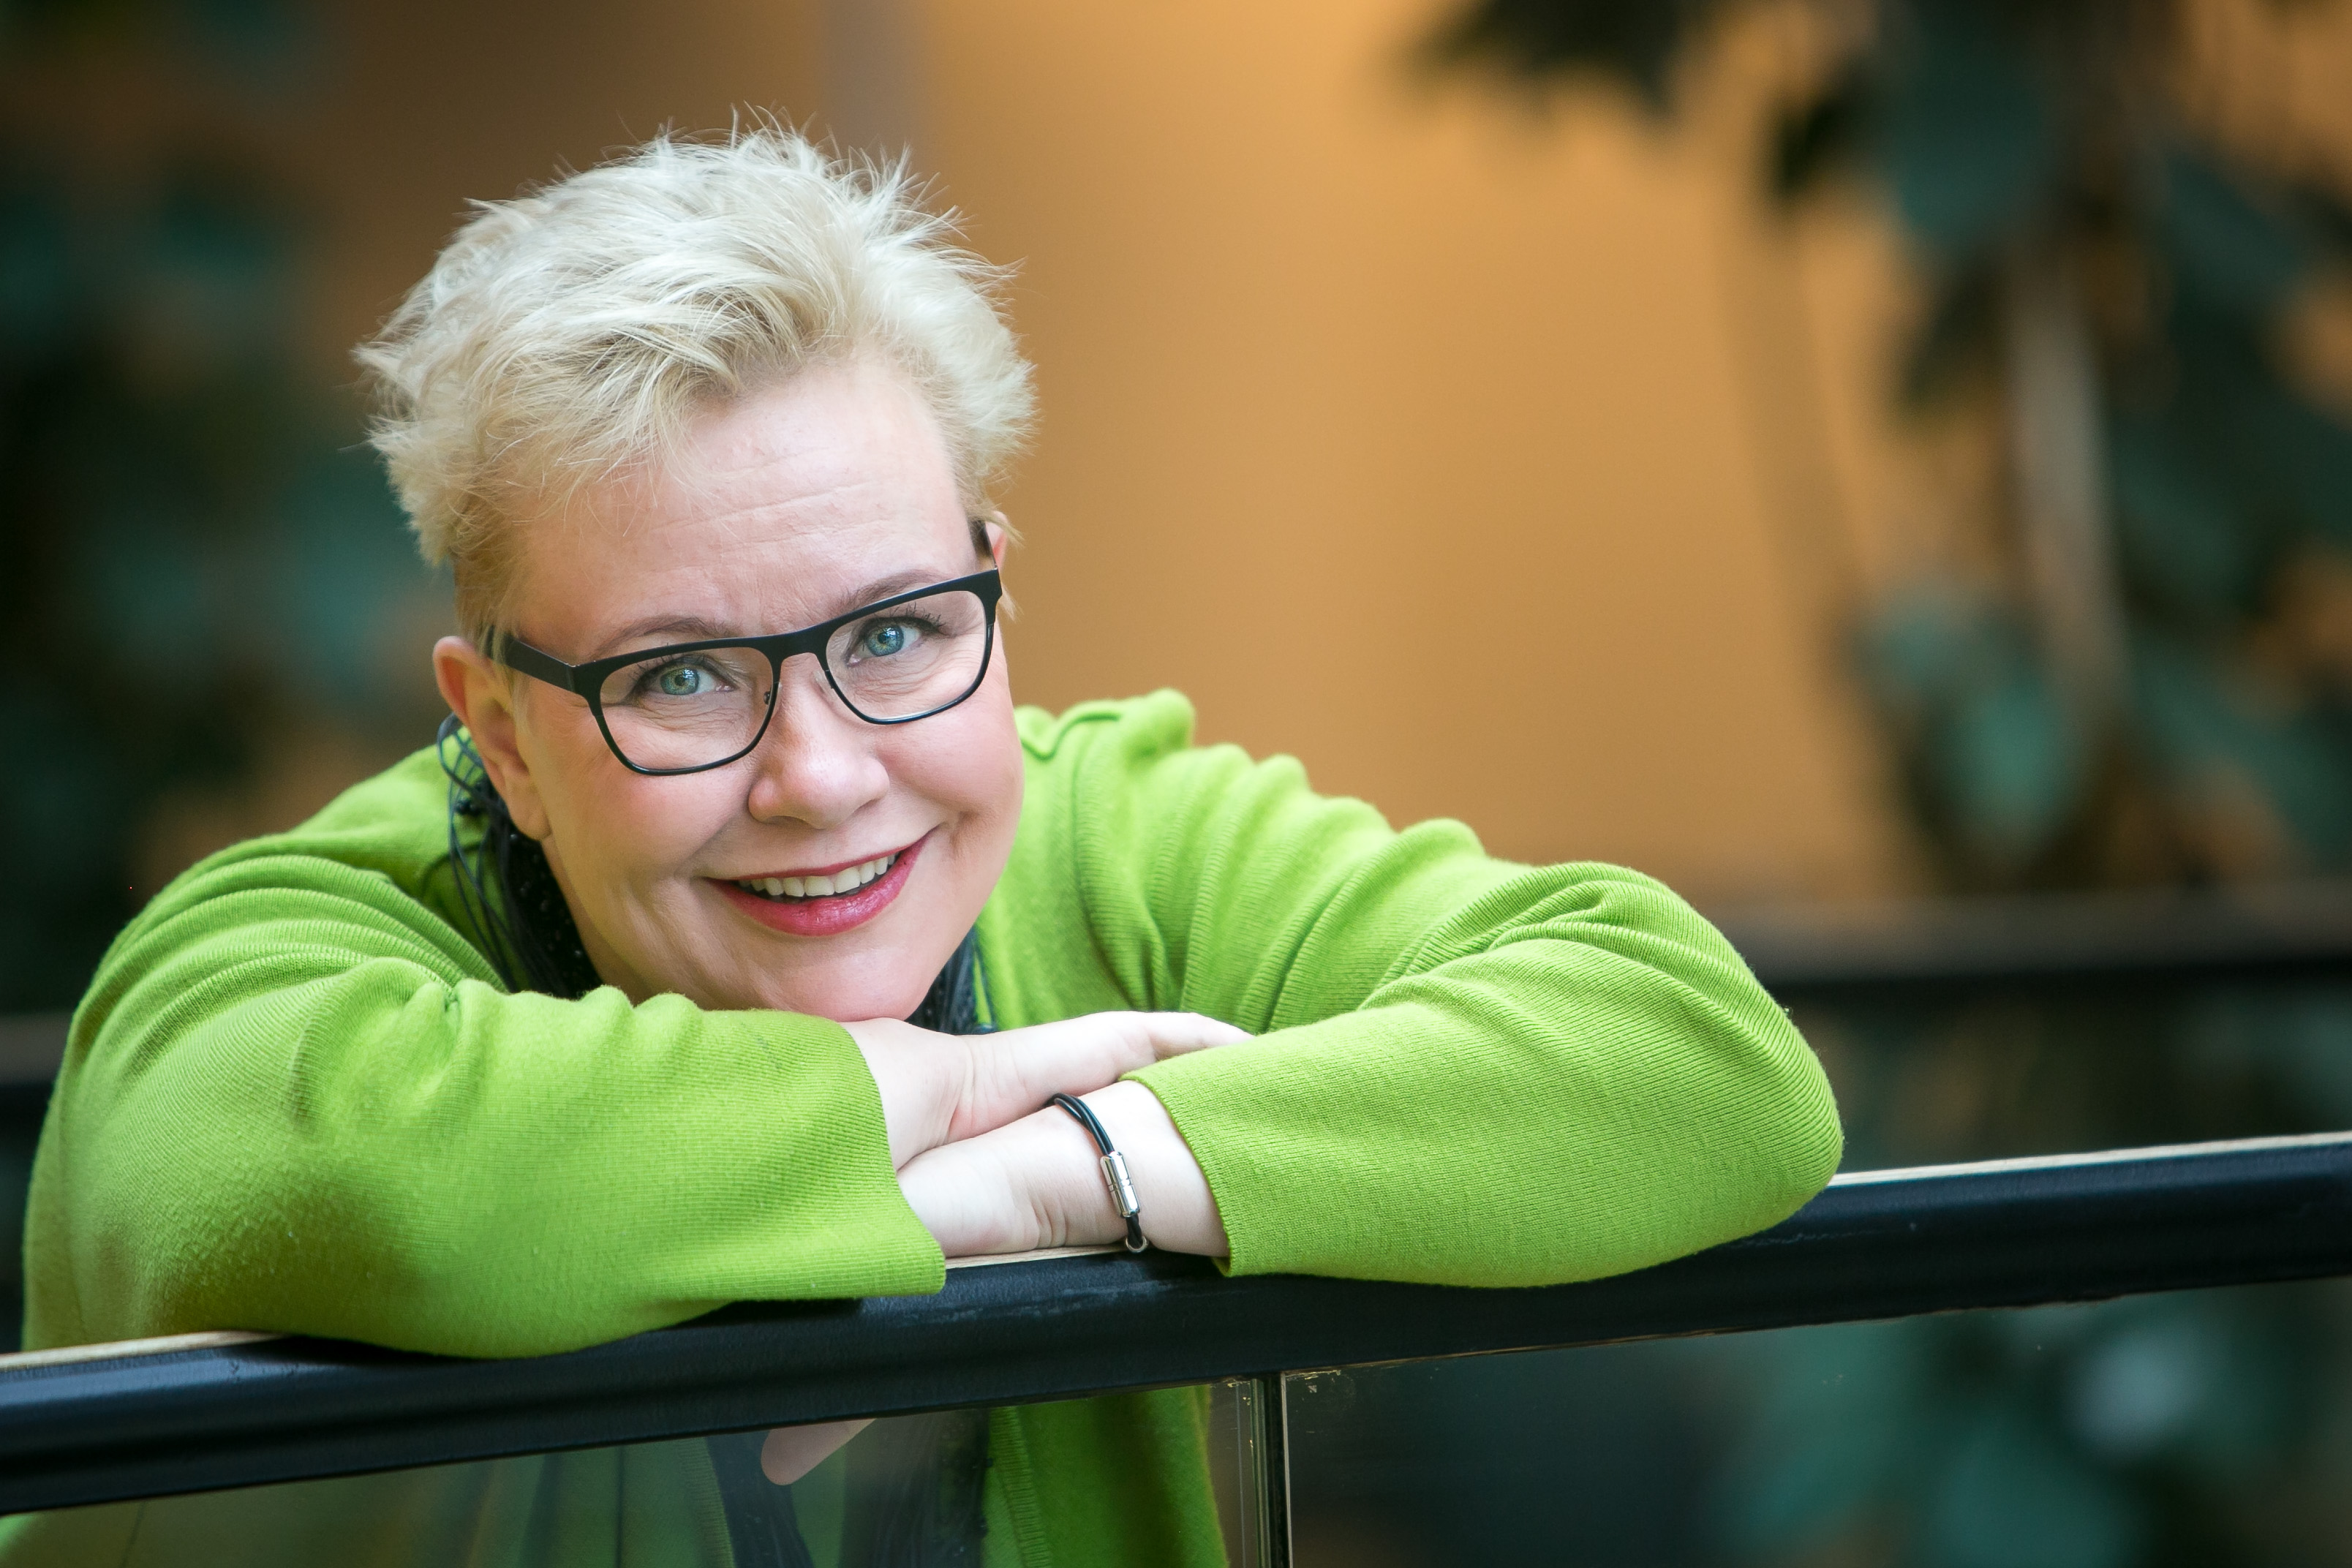 We must respect older people’s varying identities: a message from MEP Sirpa Pietikäinen